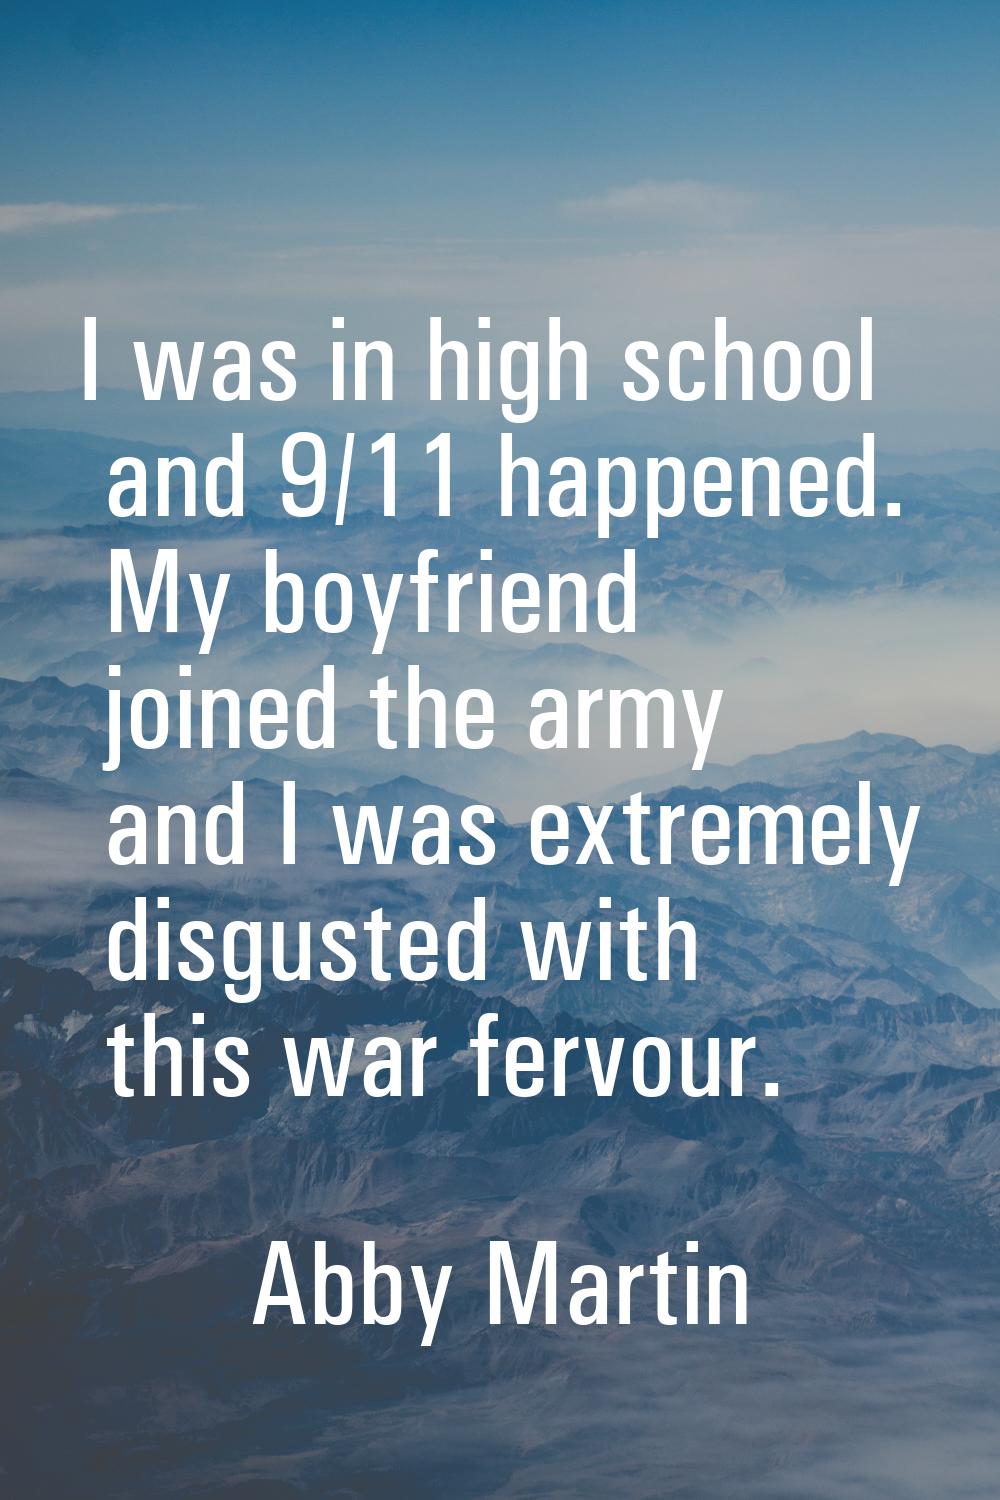 I was in high school and 9/11 happened. My boyfriend joined the army and I was extremely disgusted 